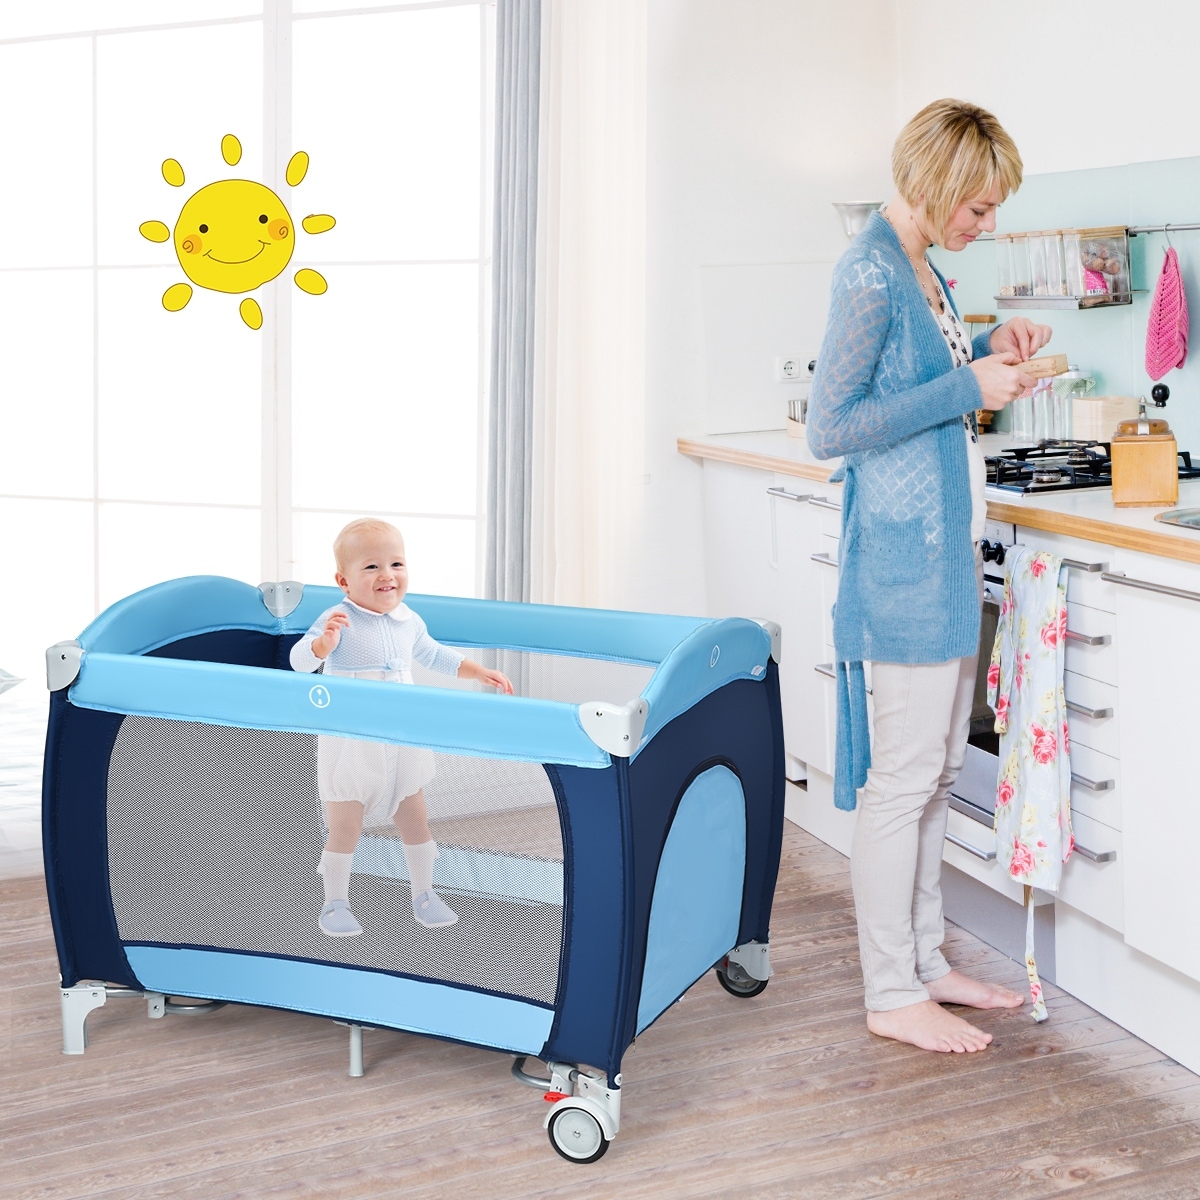 Portable Travel Baby Bed Cot Playpen Play Pen Infant Foldable Mattress Bag 